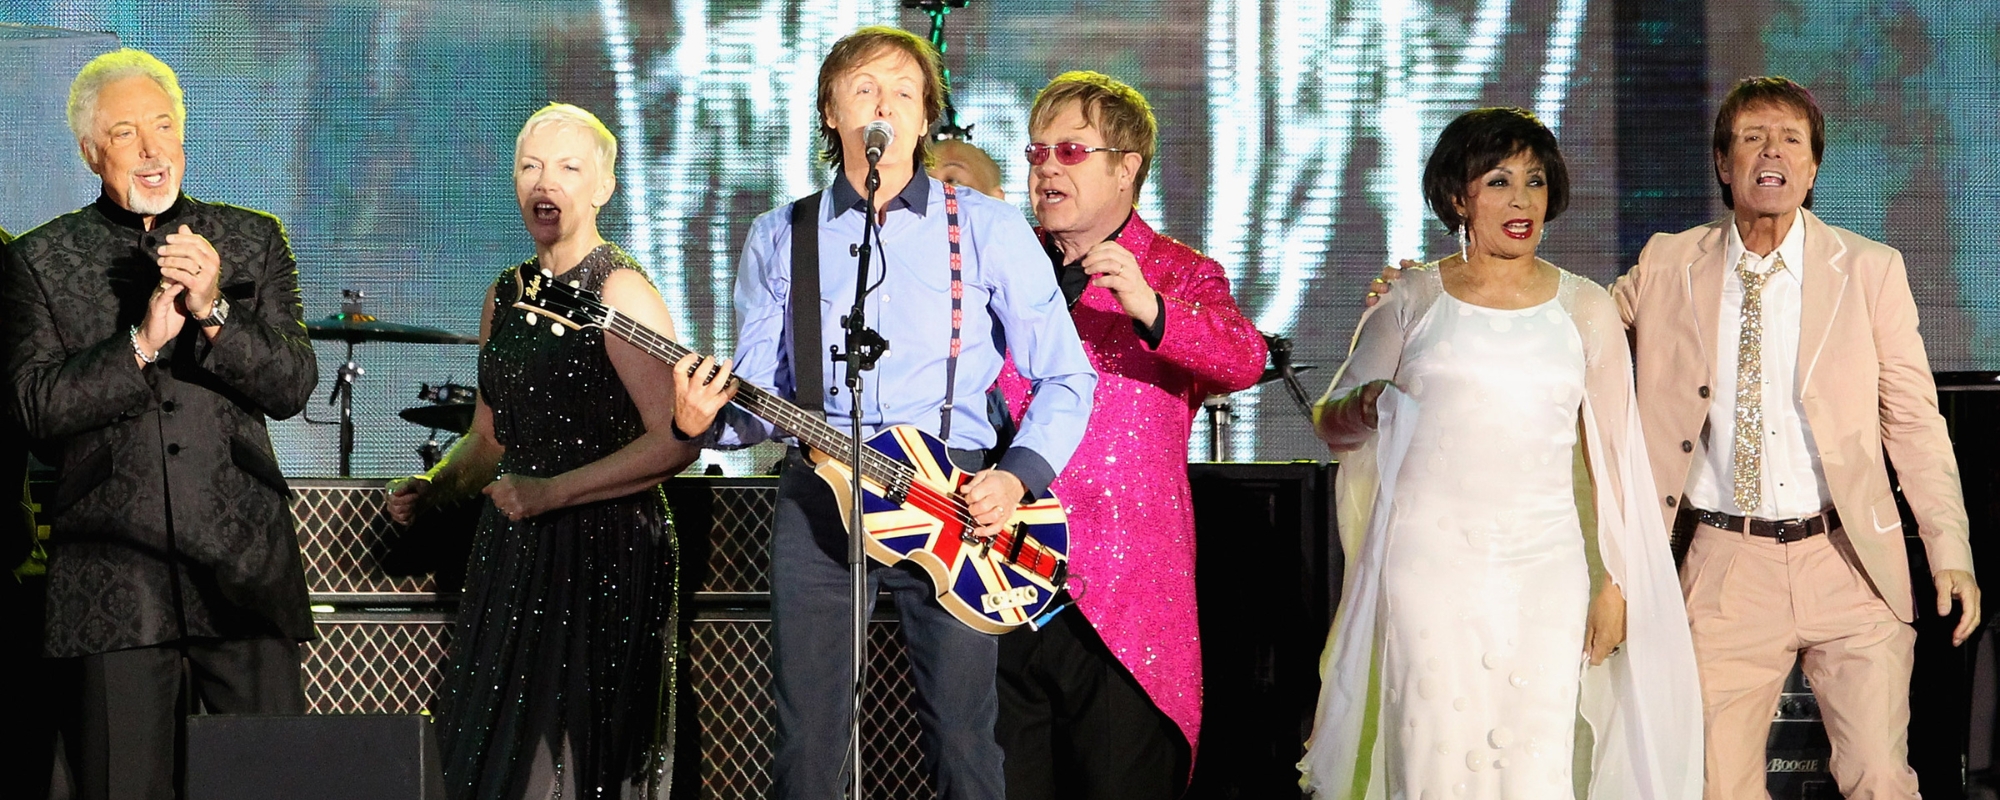 Paul McCartney, Elton John, & Garth Brooks Will Appear in Sequel to 1984 Film, ‘This Is Spinal Tap’